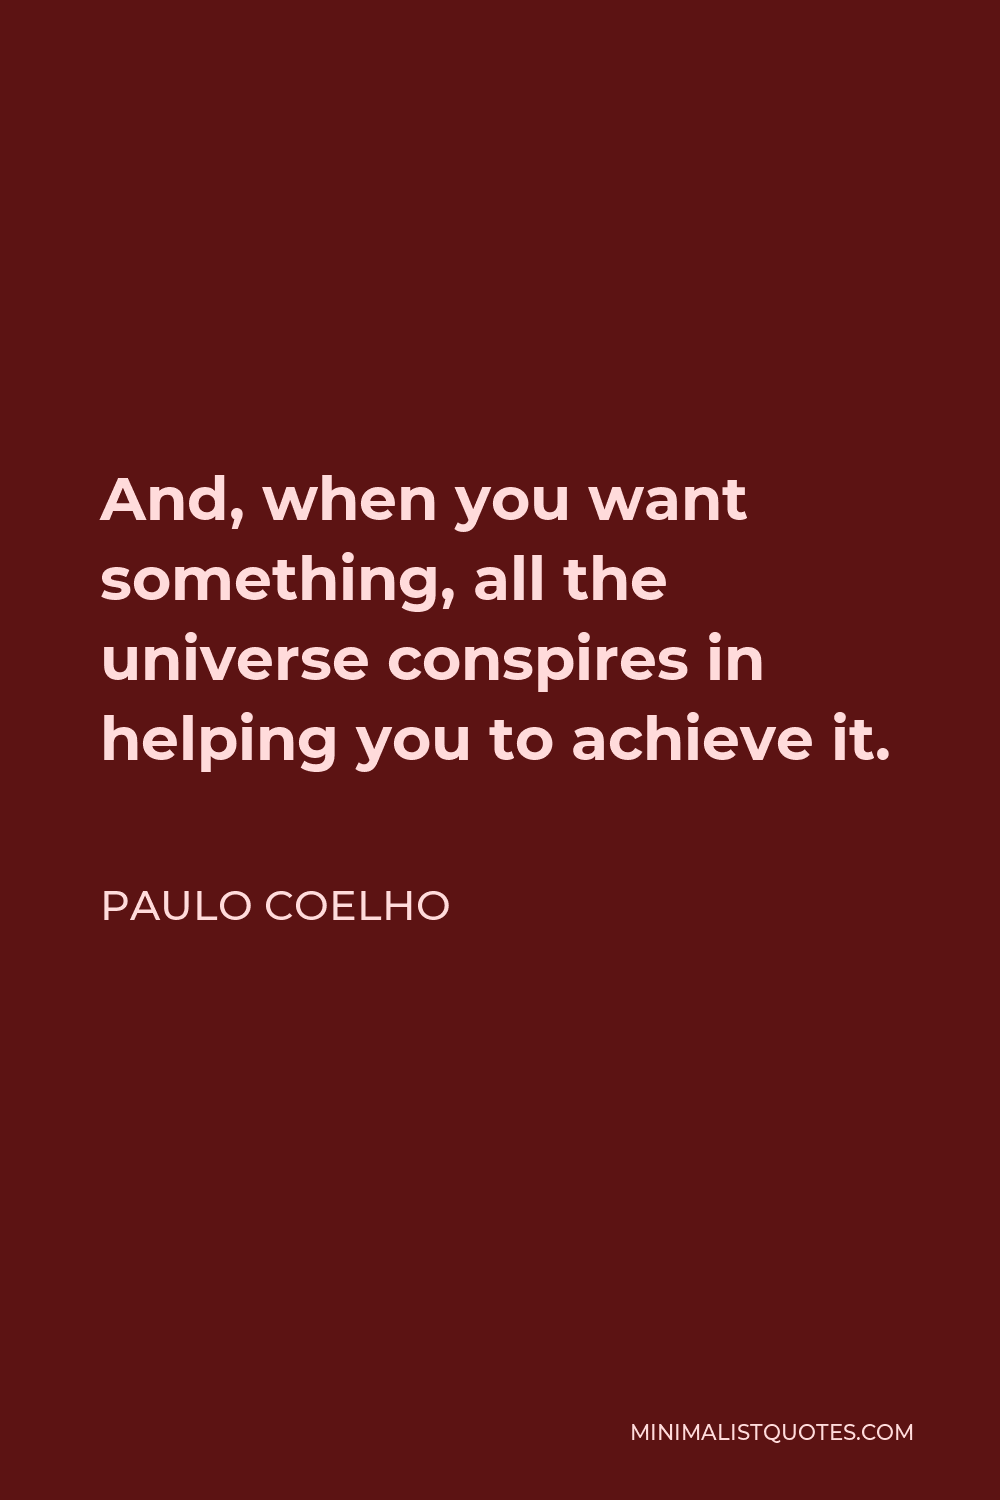 Paulo Coelho Quote - And, when you want something, all the universe conspires in helping you to achieve it.